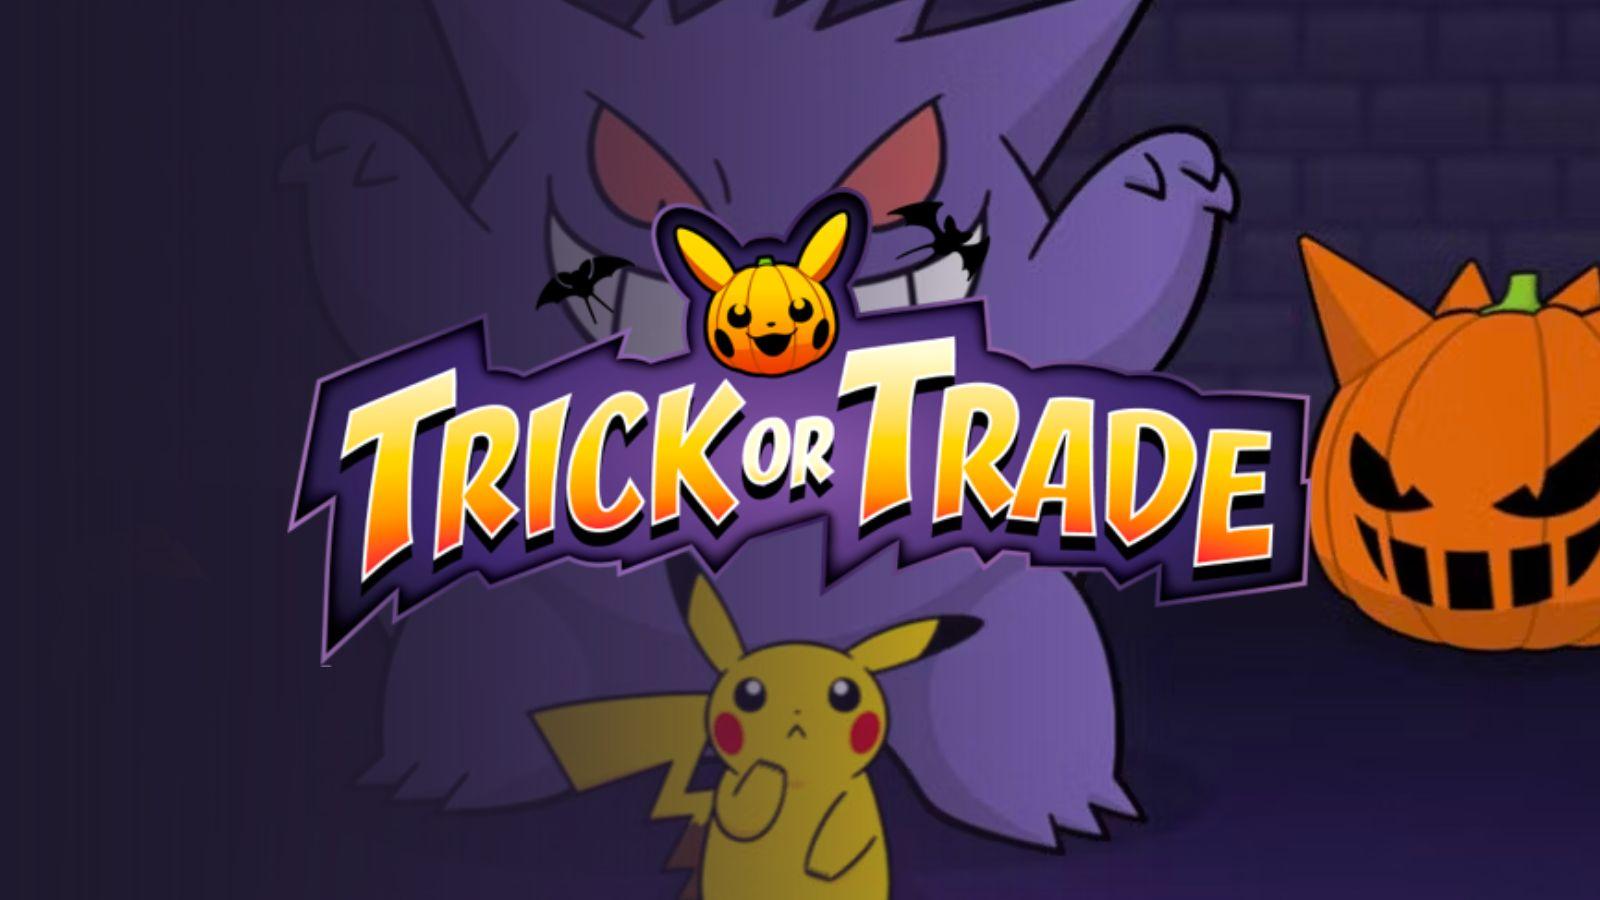 Pokemon TCG: Trick or Trade Booster Bundle and Pokemon GO Pin Collections  Are Now Available - IGN